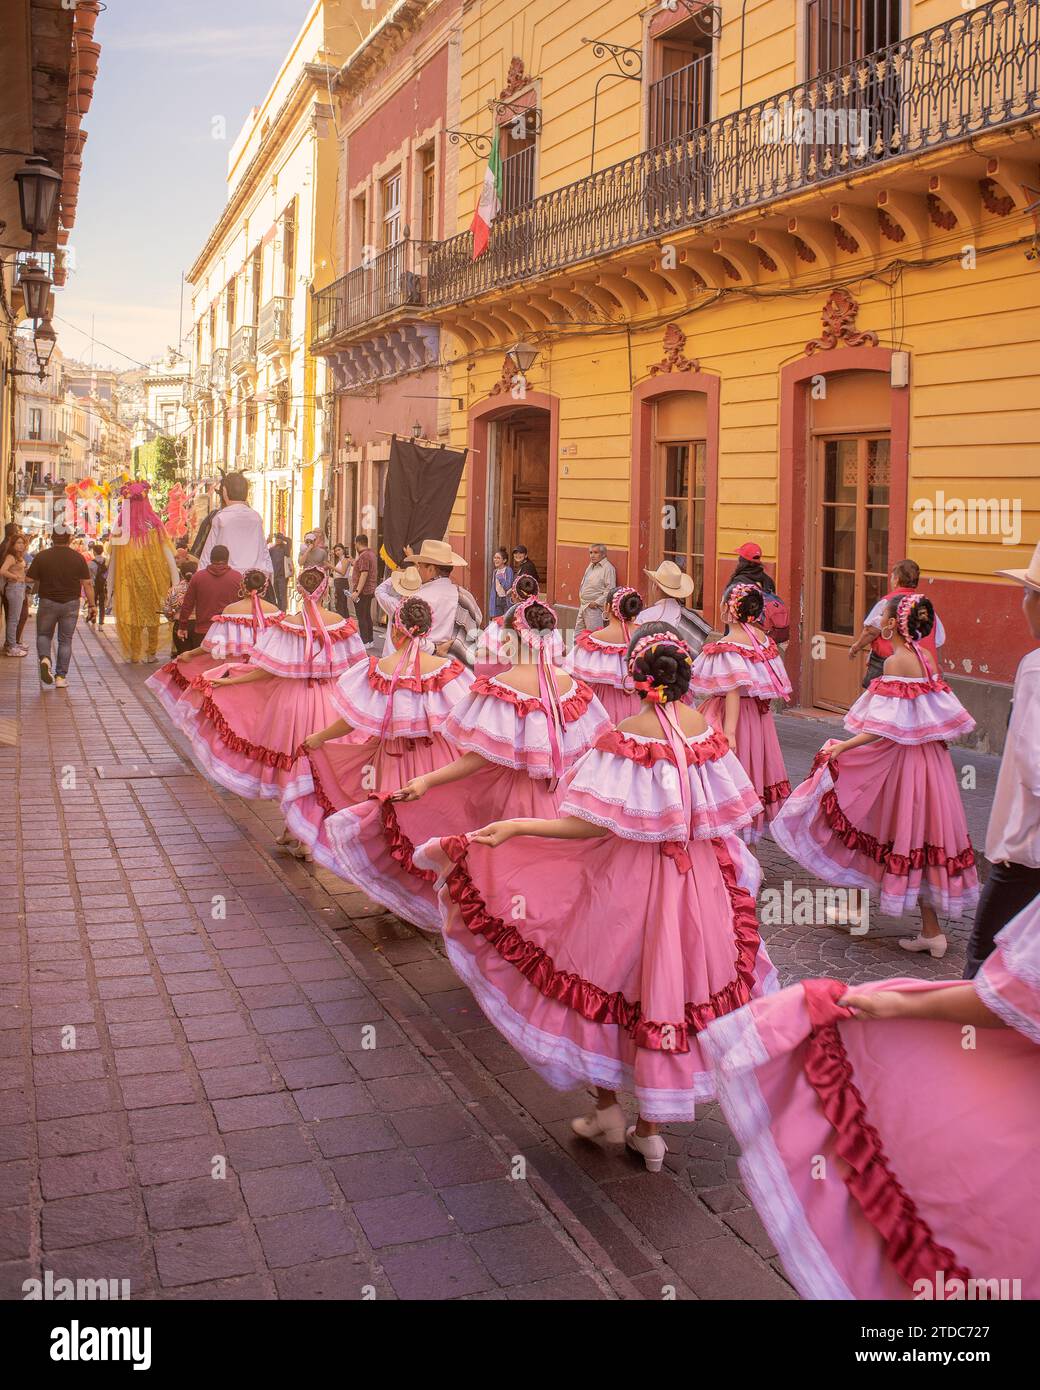 Guanajuato, Guanajuato, Mexico, 06 11 22, Street parade of traditional music by group of dancers in regional costumes, walk through the city center Stock Photo